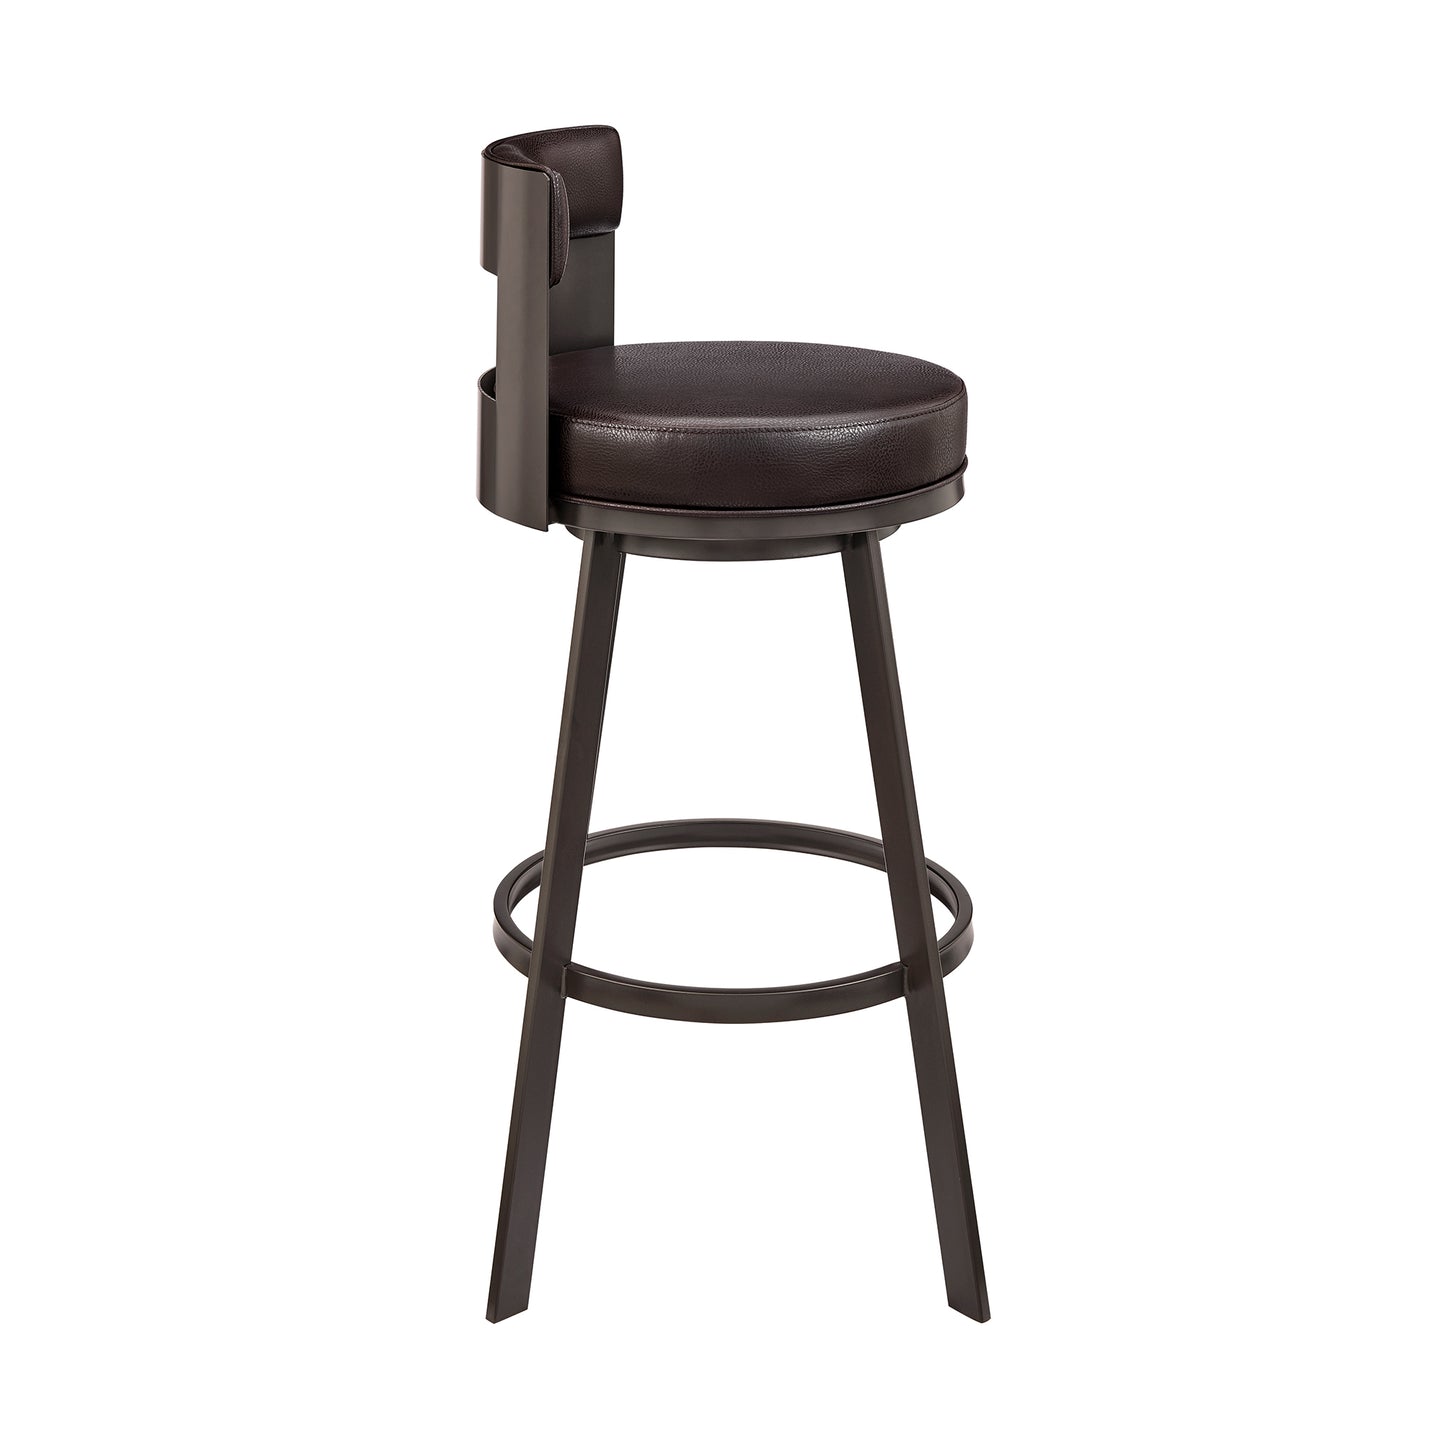 Flynn 30" Swivel Bar Stool in Brown Metal with Brown Faux Leather